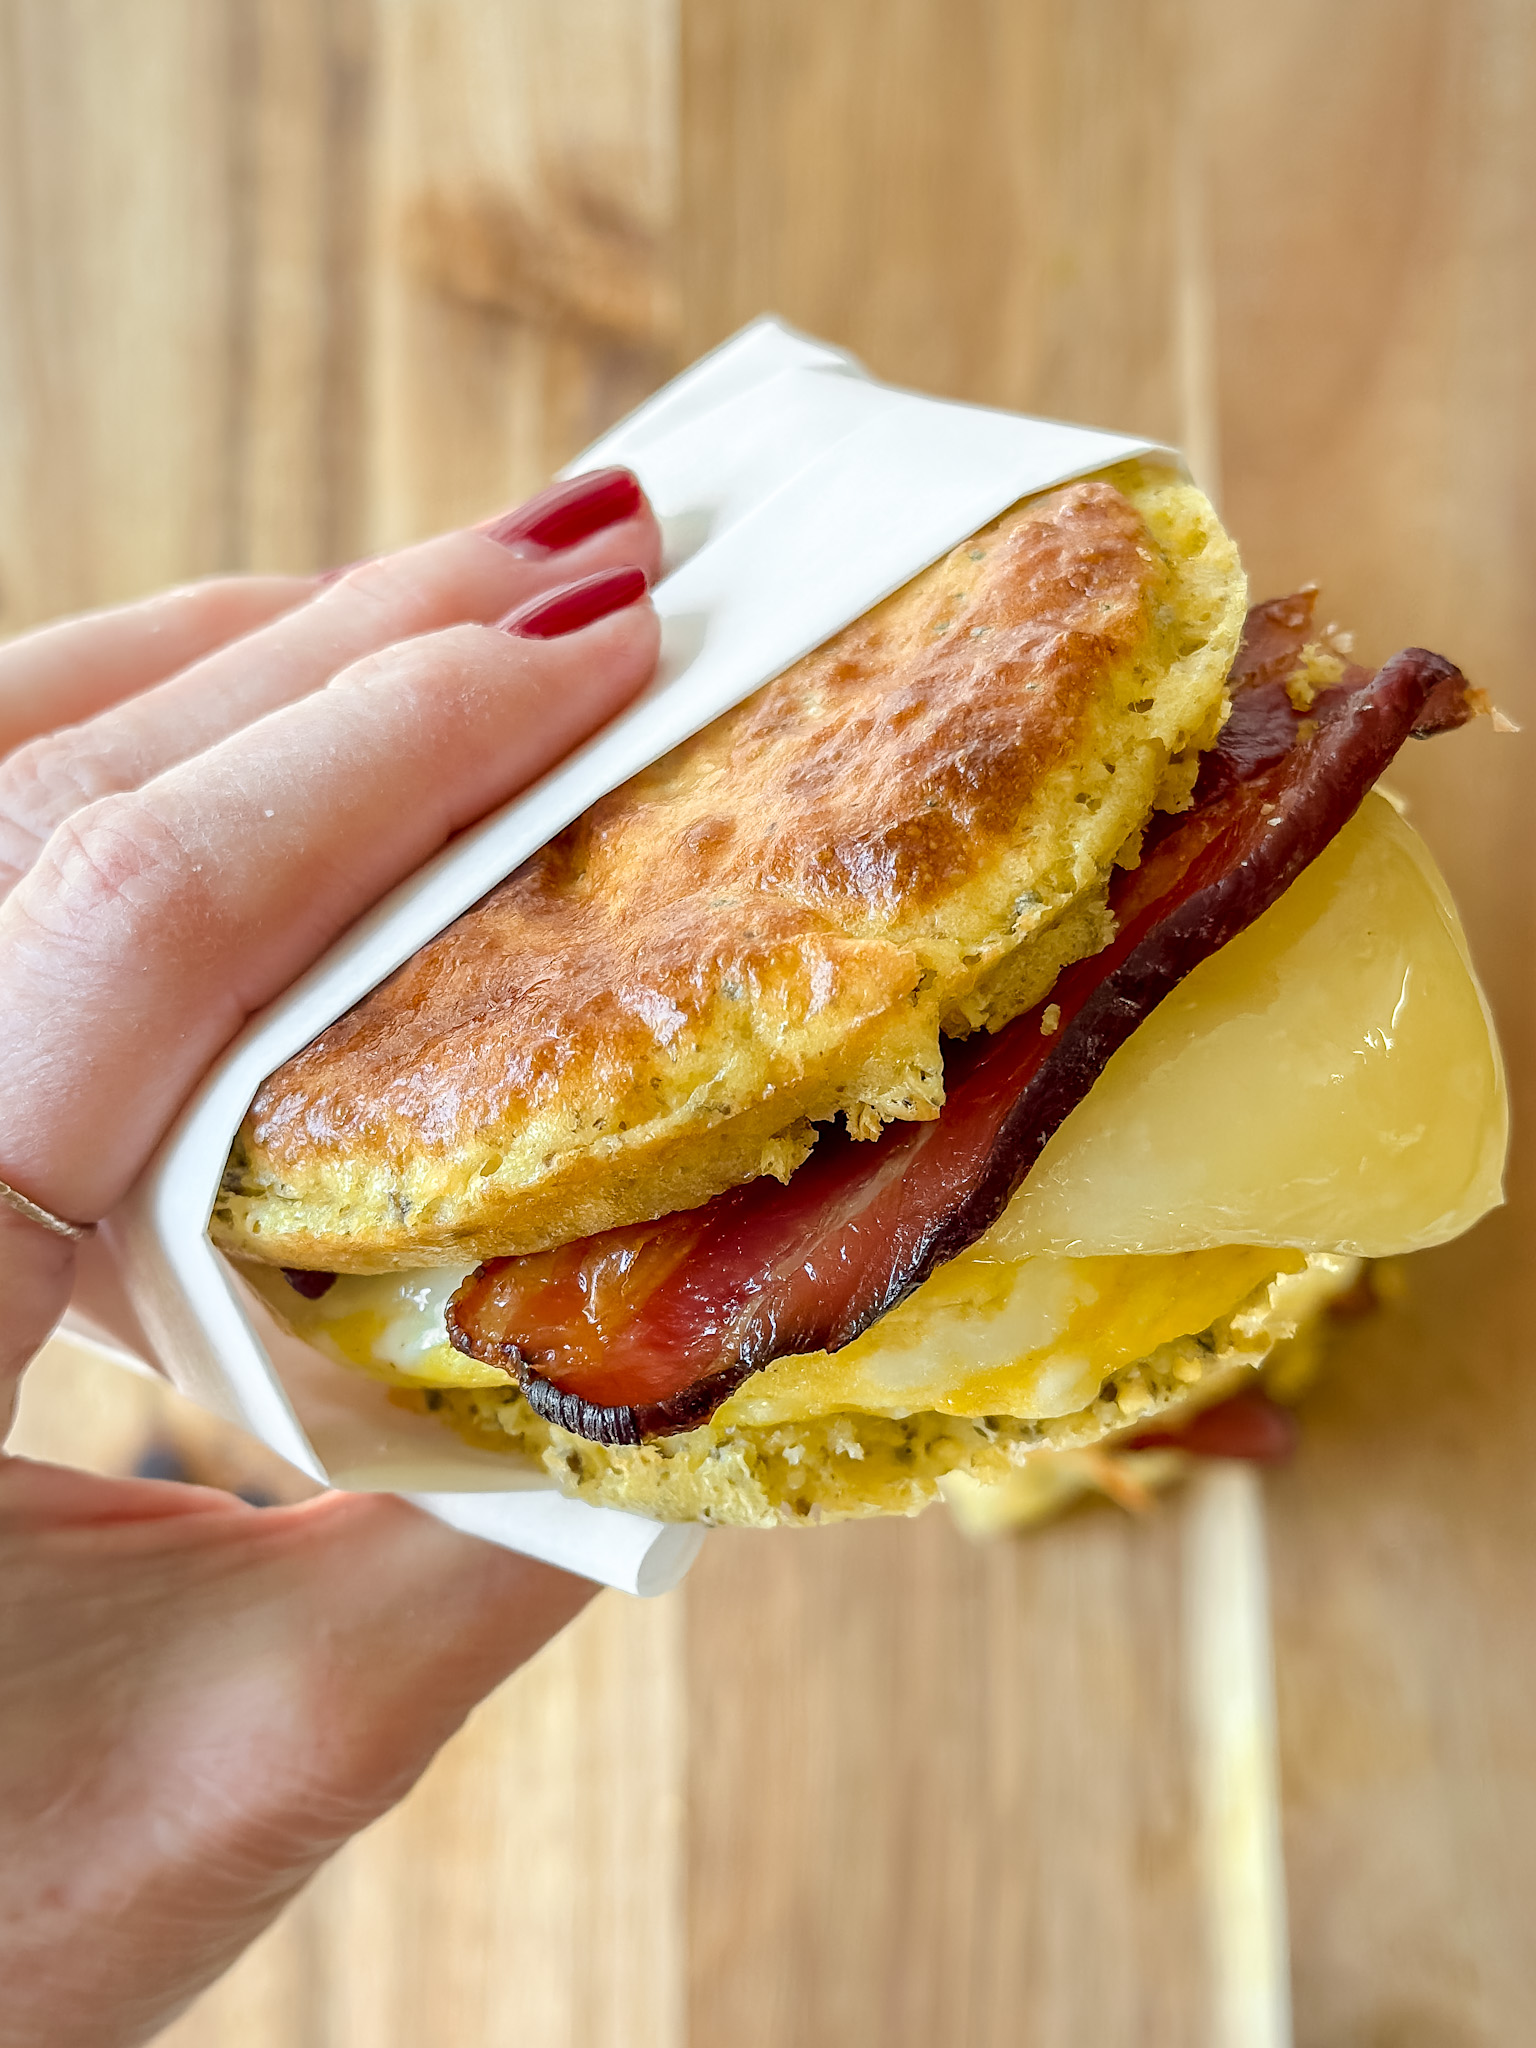 hand holding a breakfast sandwich- homemade english muffin, egg, cheese, bacon